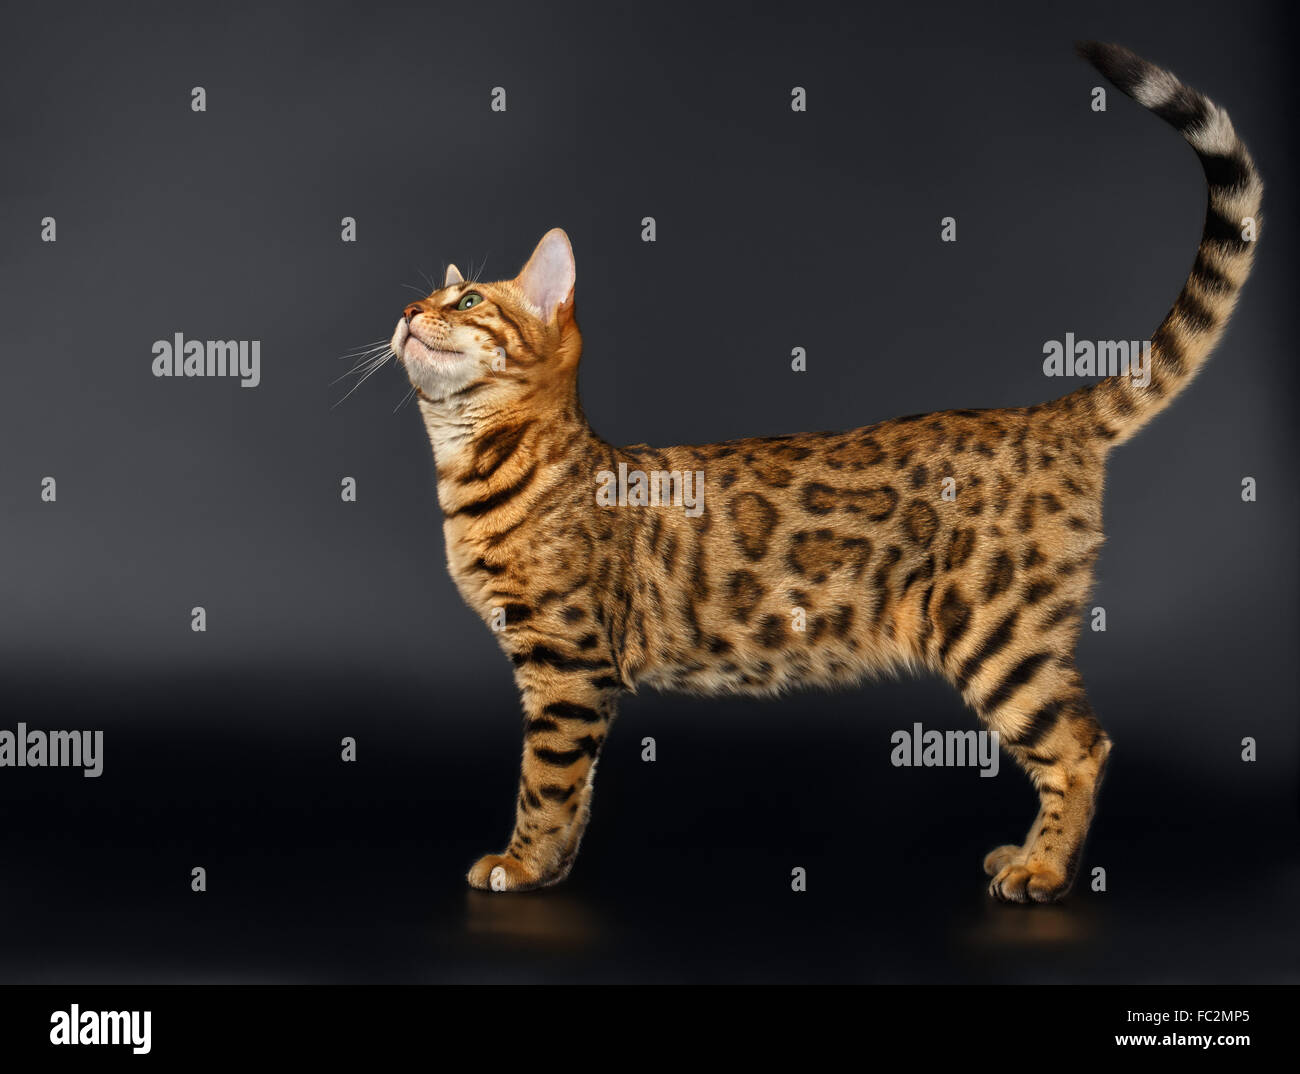 Bengal Cat Looking up on Black background Stock Photo